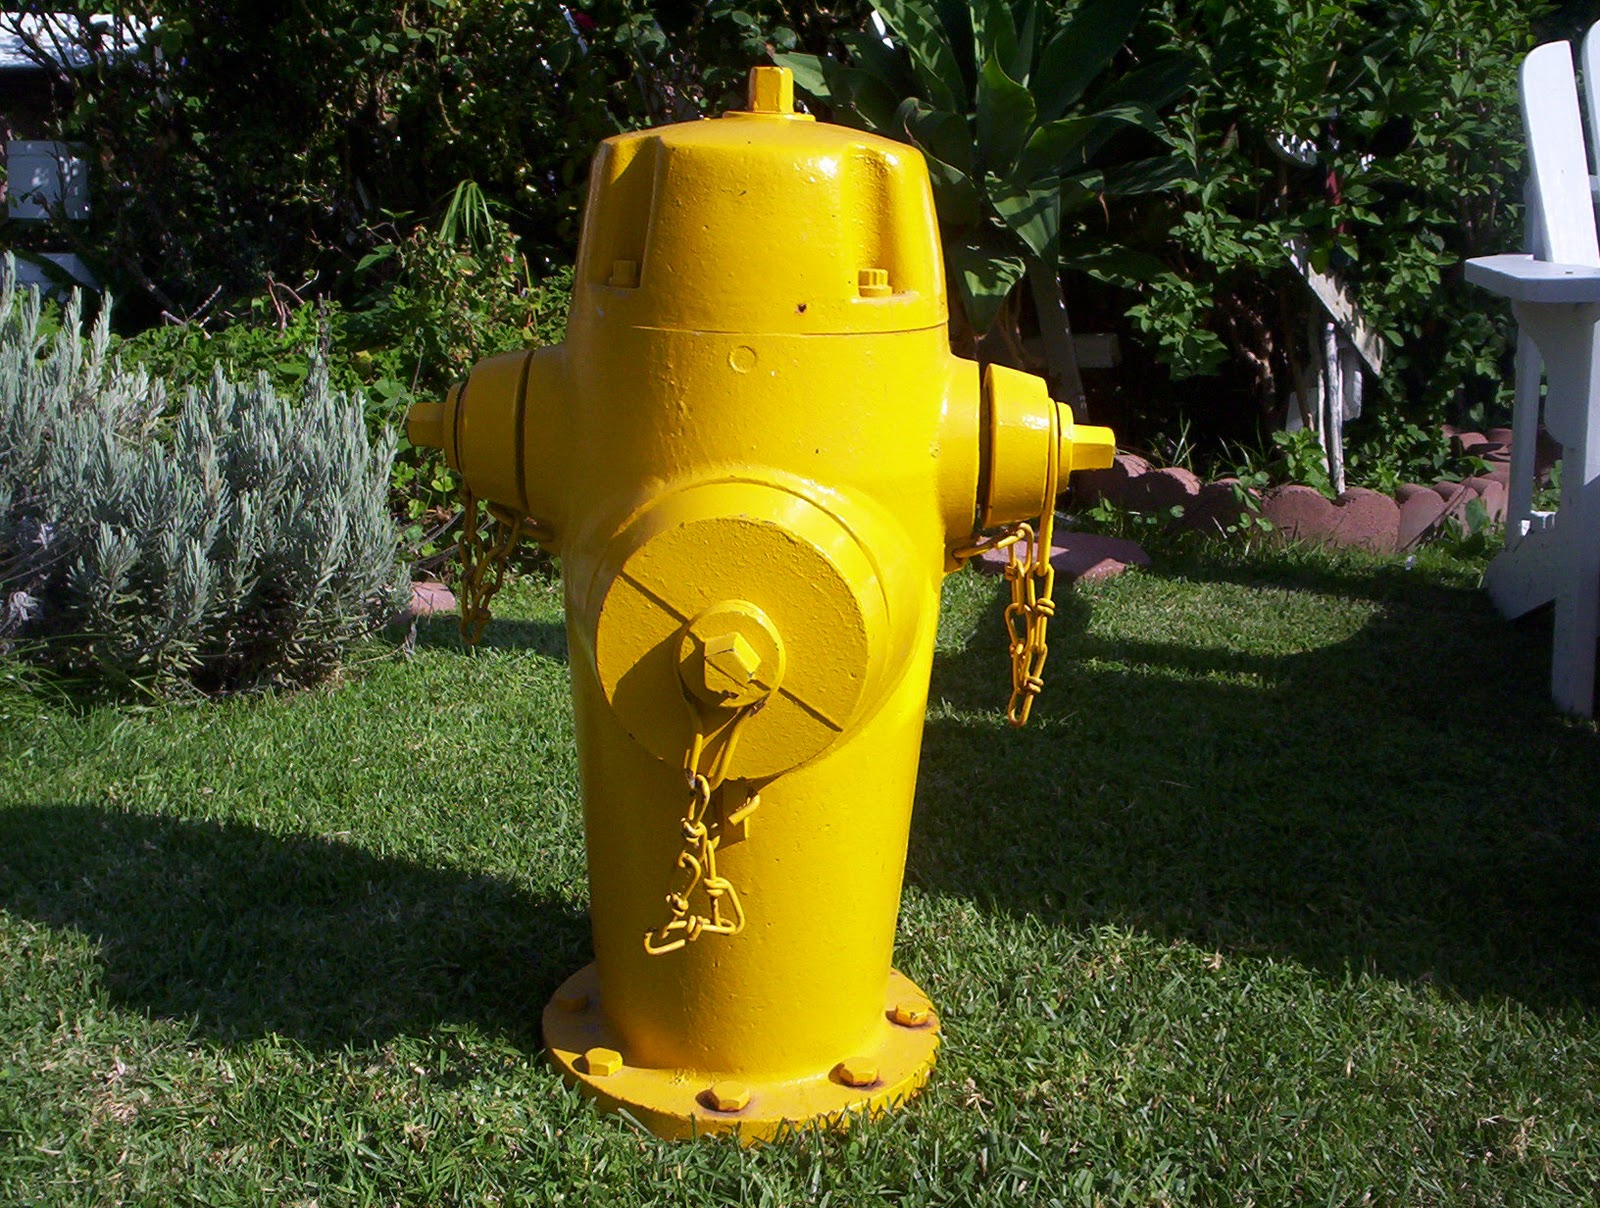 Shabby To Chic Treasures: Yellow Fire Hydrant A rare find
